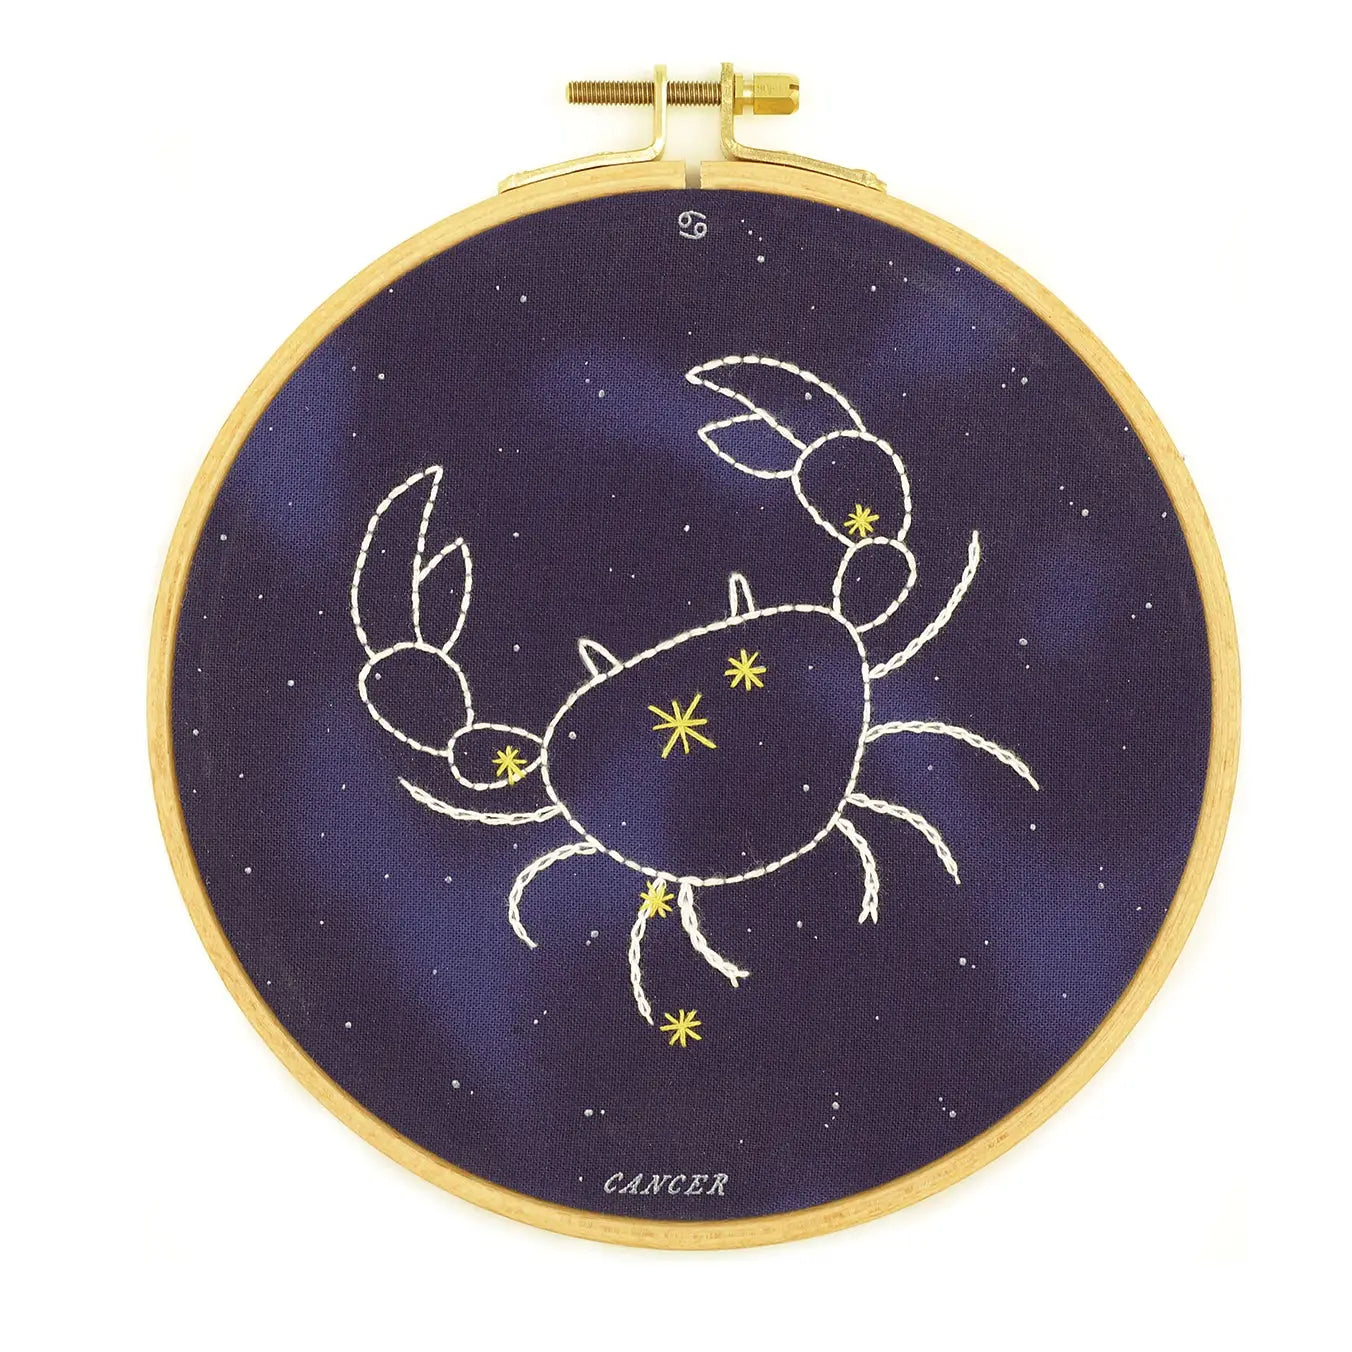 Cancer embroidery hoop kit